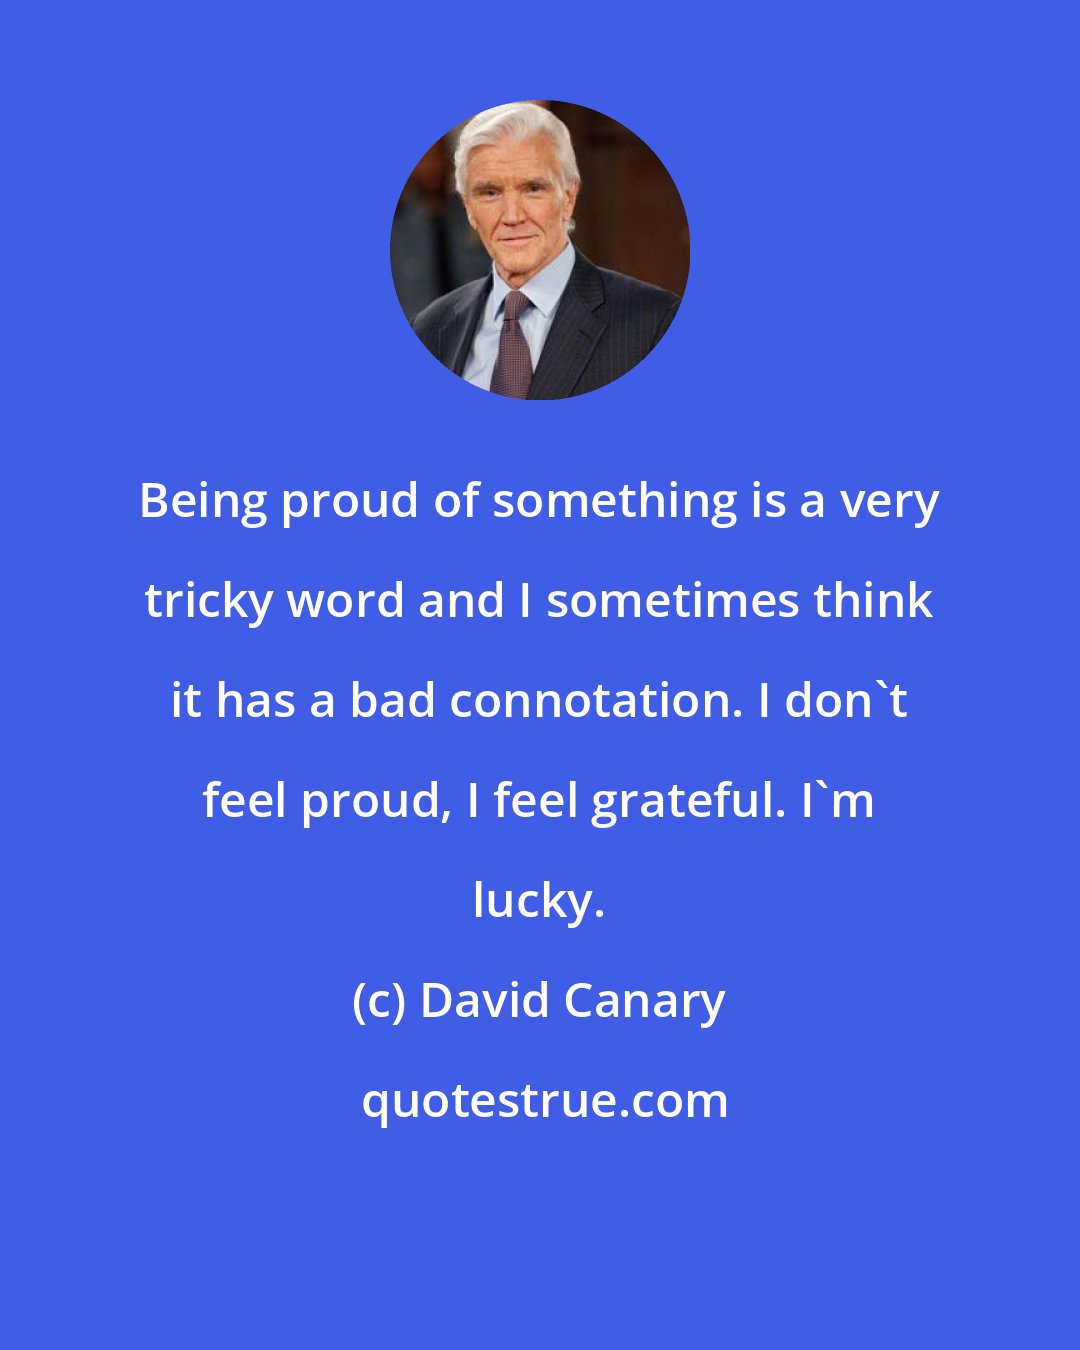 David Canary: Being proud of something is a very tricky word and I sometimes think it has a bad connotation. I don't feel proud, I feel grateful. I'm lucky.